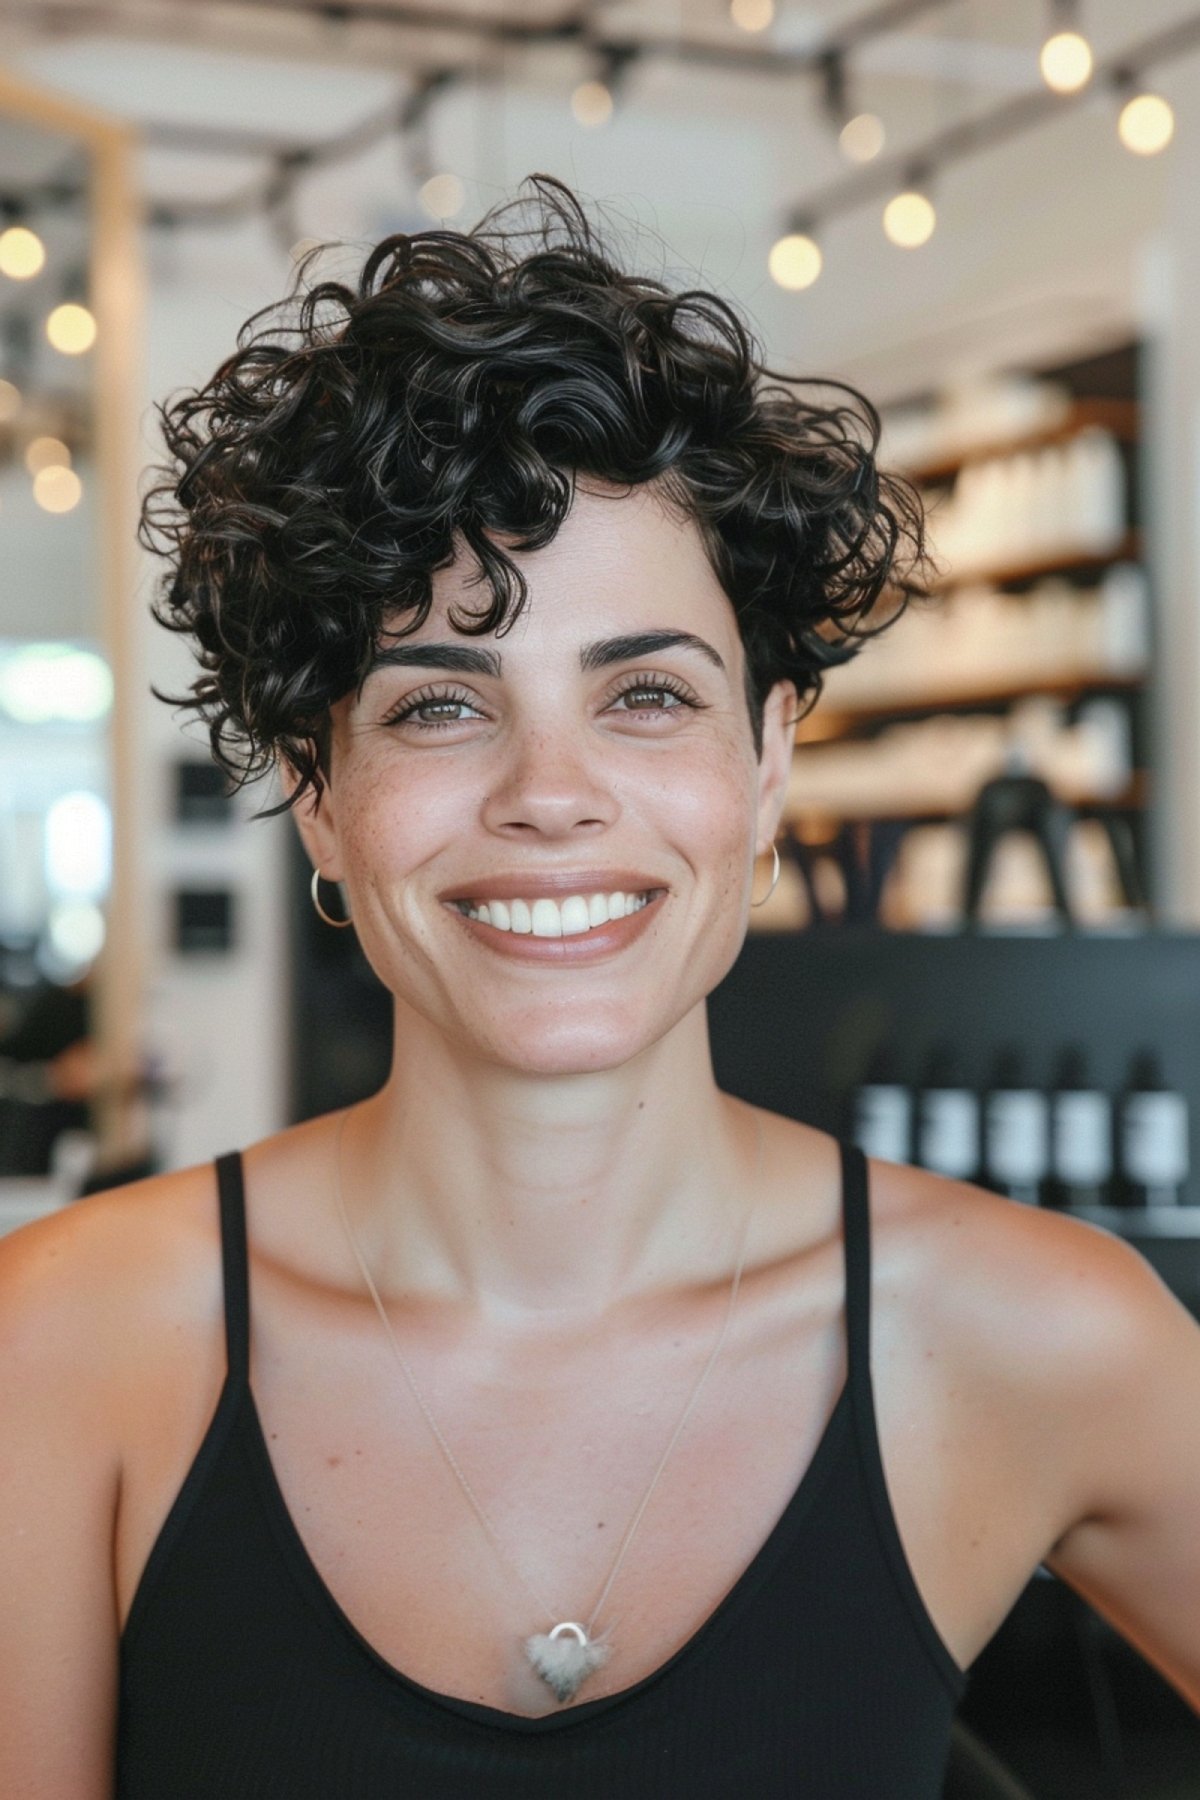 Woman with short curly pixie haircut smiling in a salon